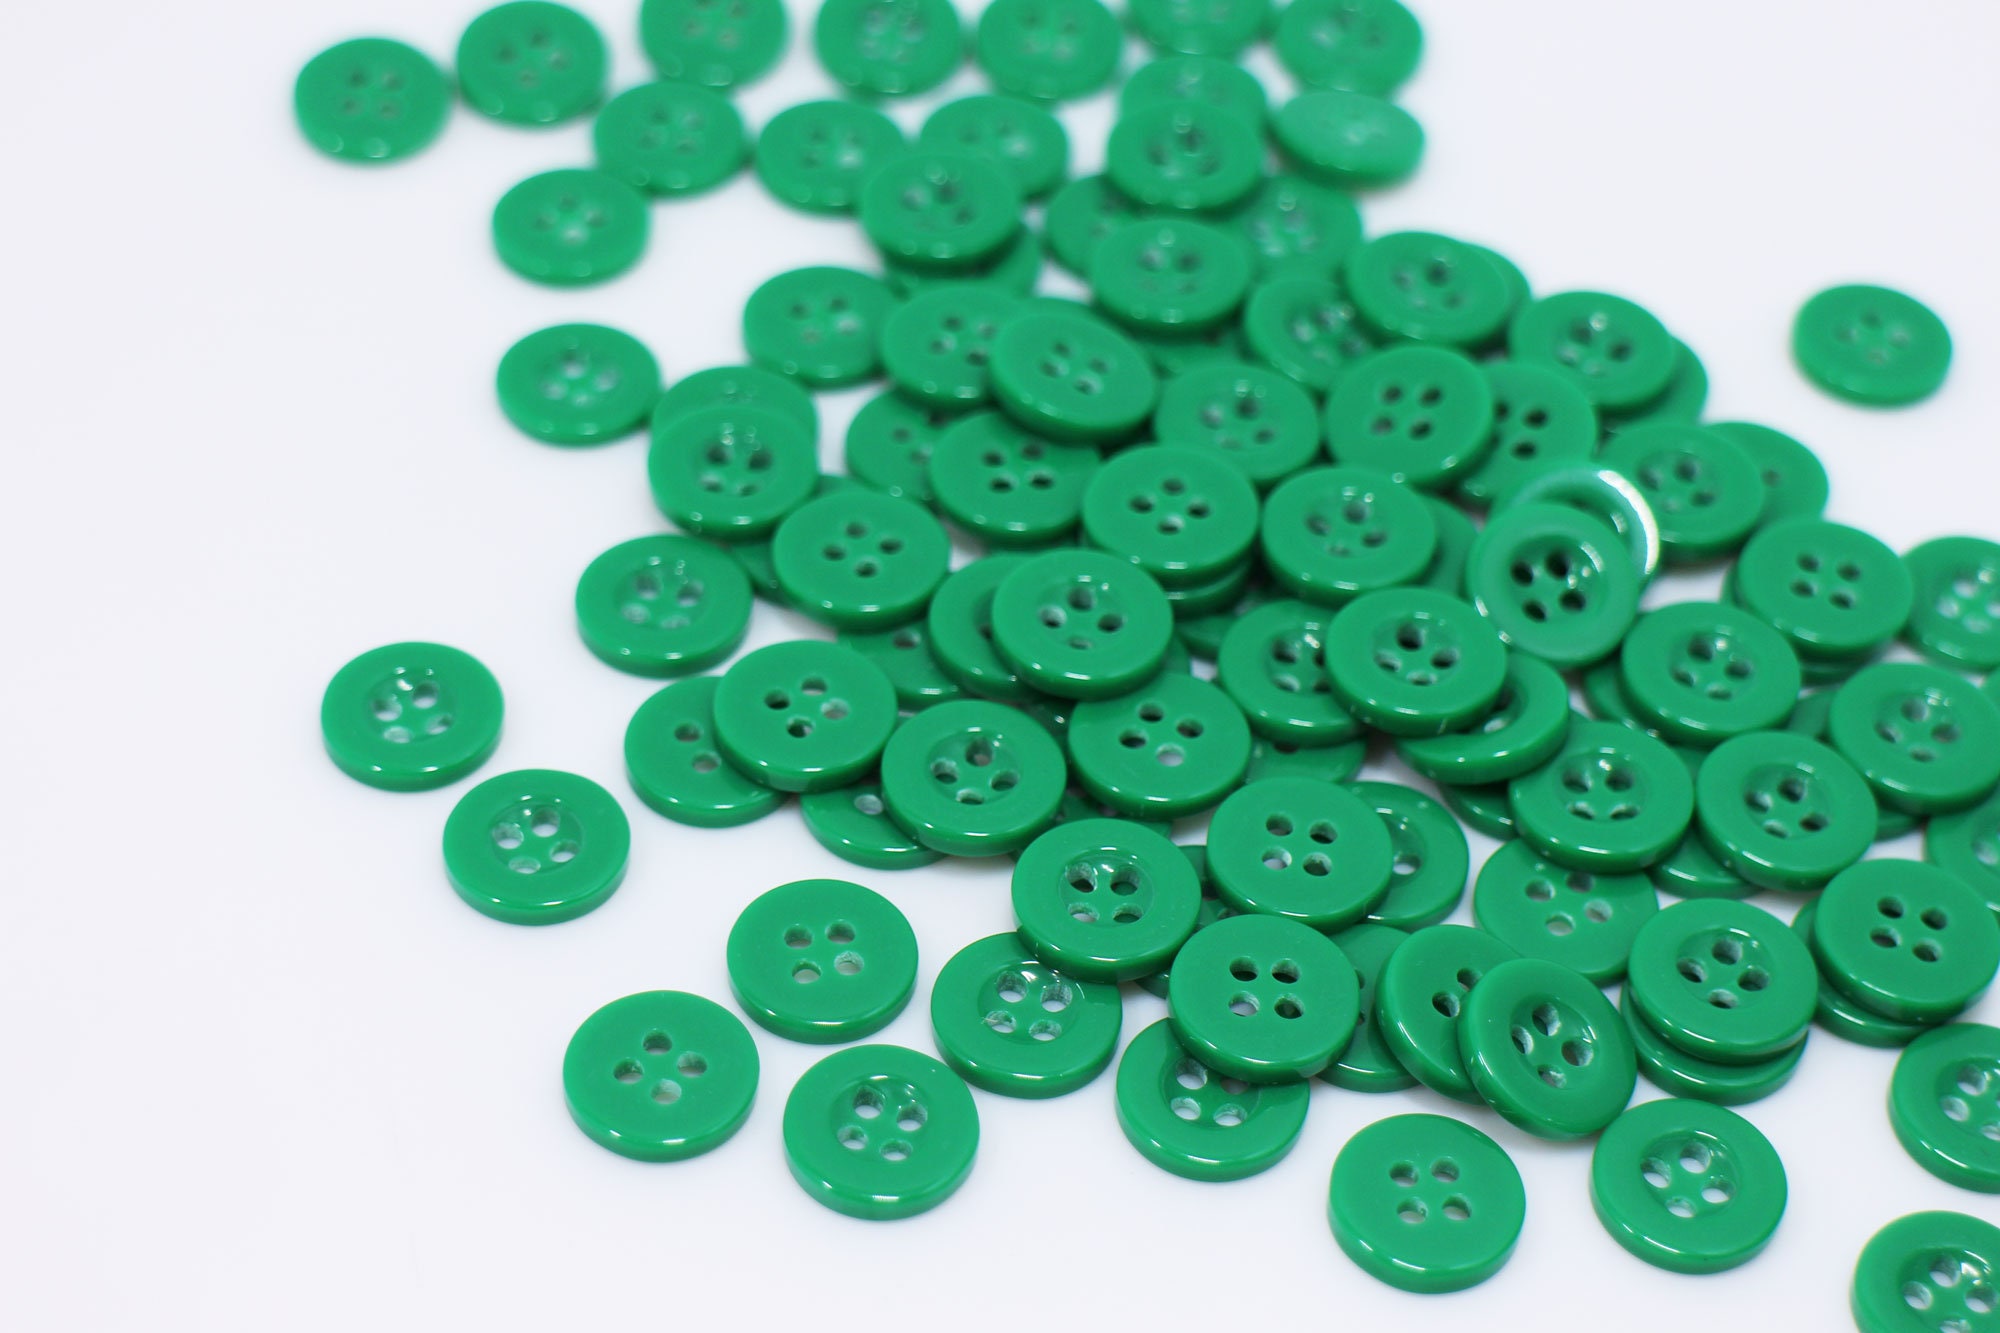 2000 Pieces Colourful Buttons for Crafts, Plastic Craft Knots, Buttons,  Resin Kids Buttons, Colored Buttons for DIY Sewing, Scrapbooking and  Crafts